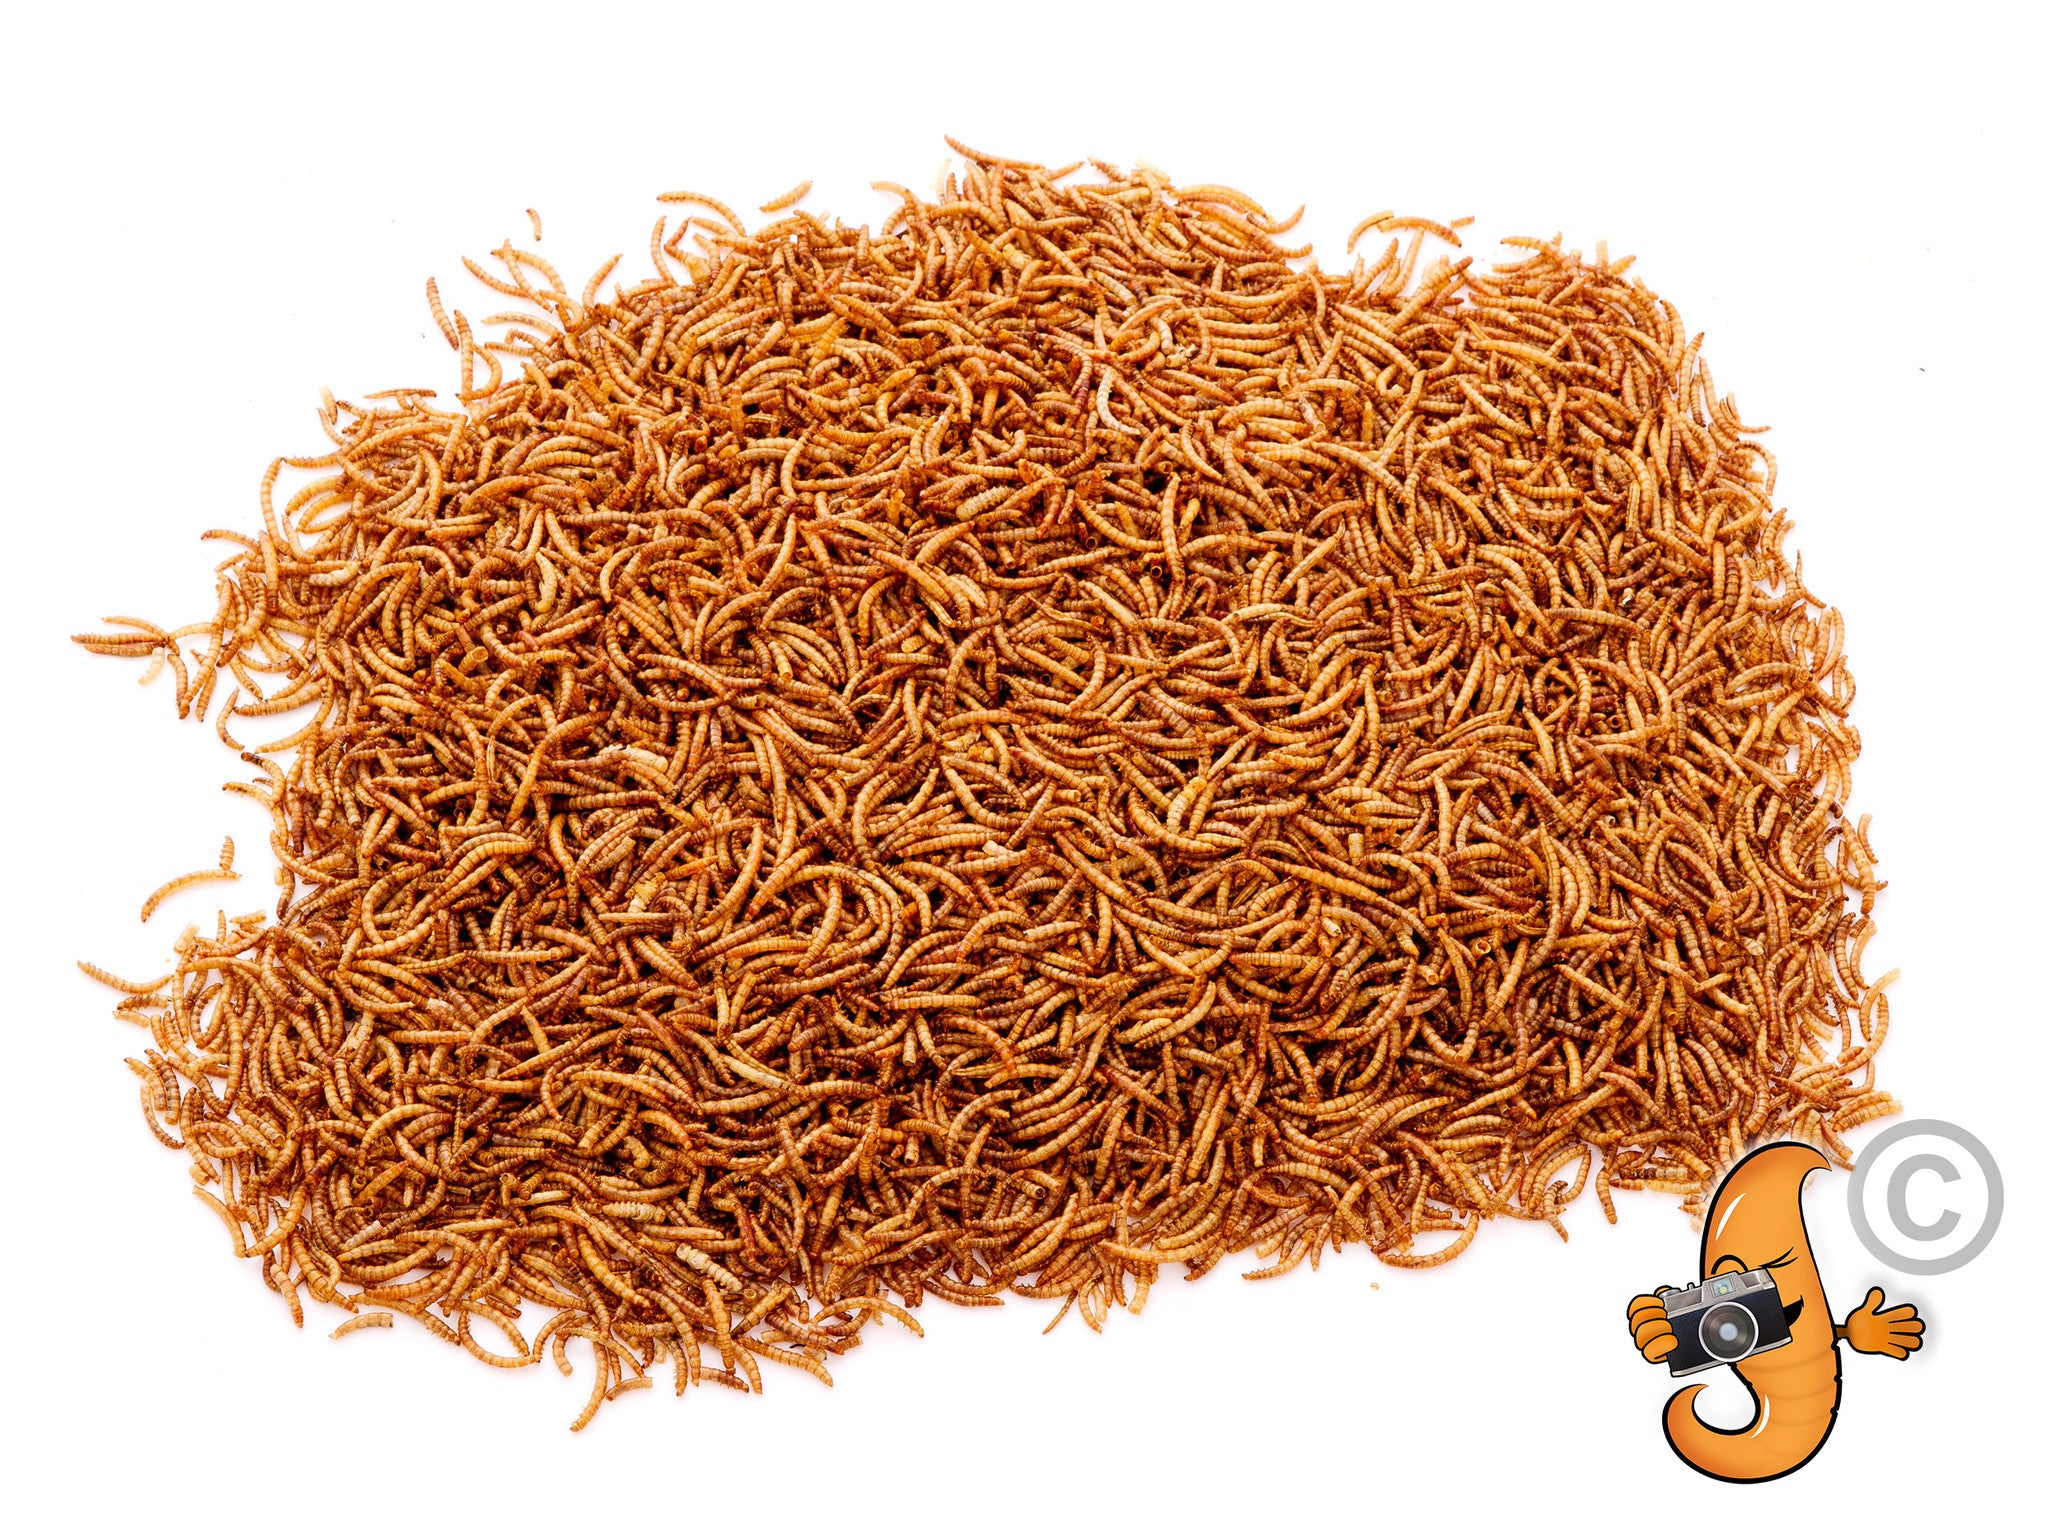 29.96Kg (66Lbs) Dried Chubby Mealworms -  - 3